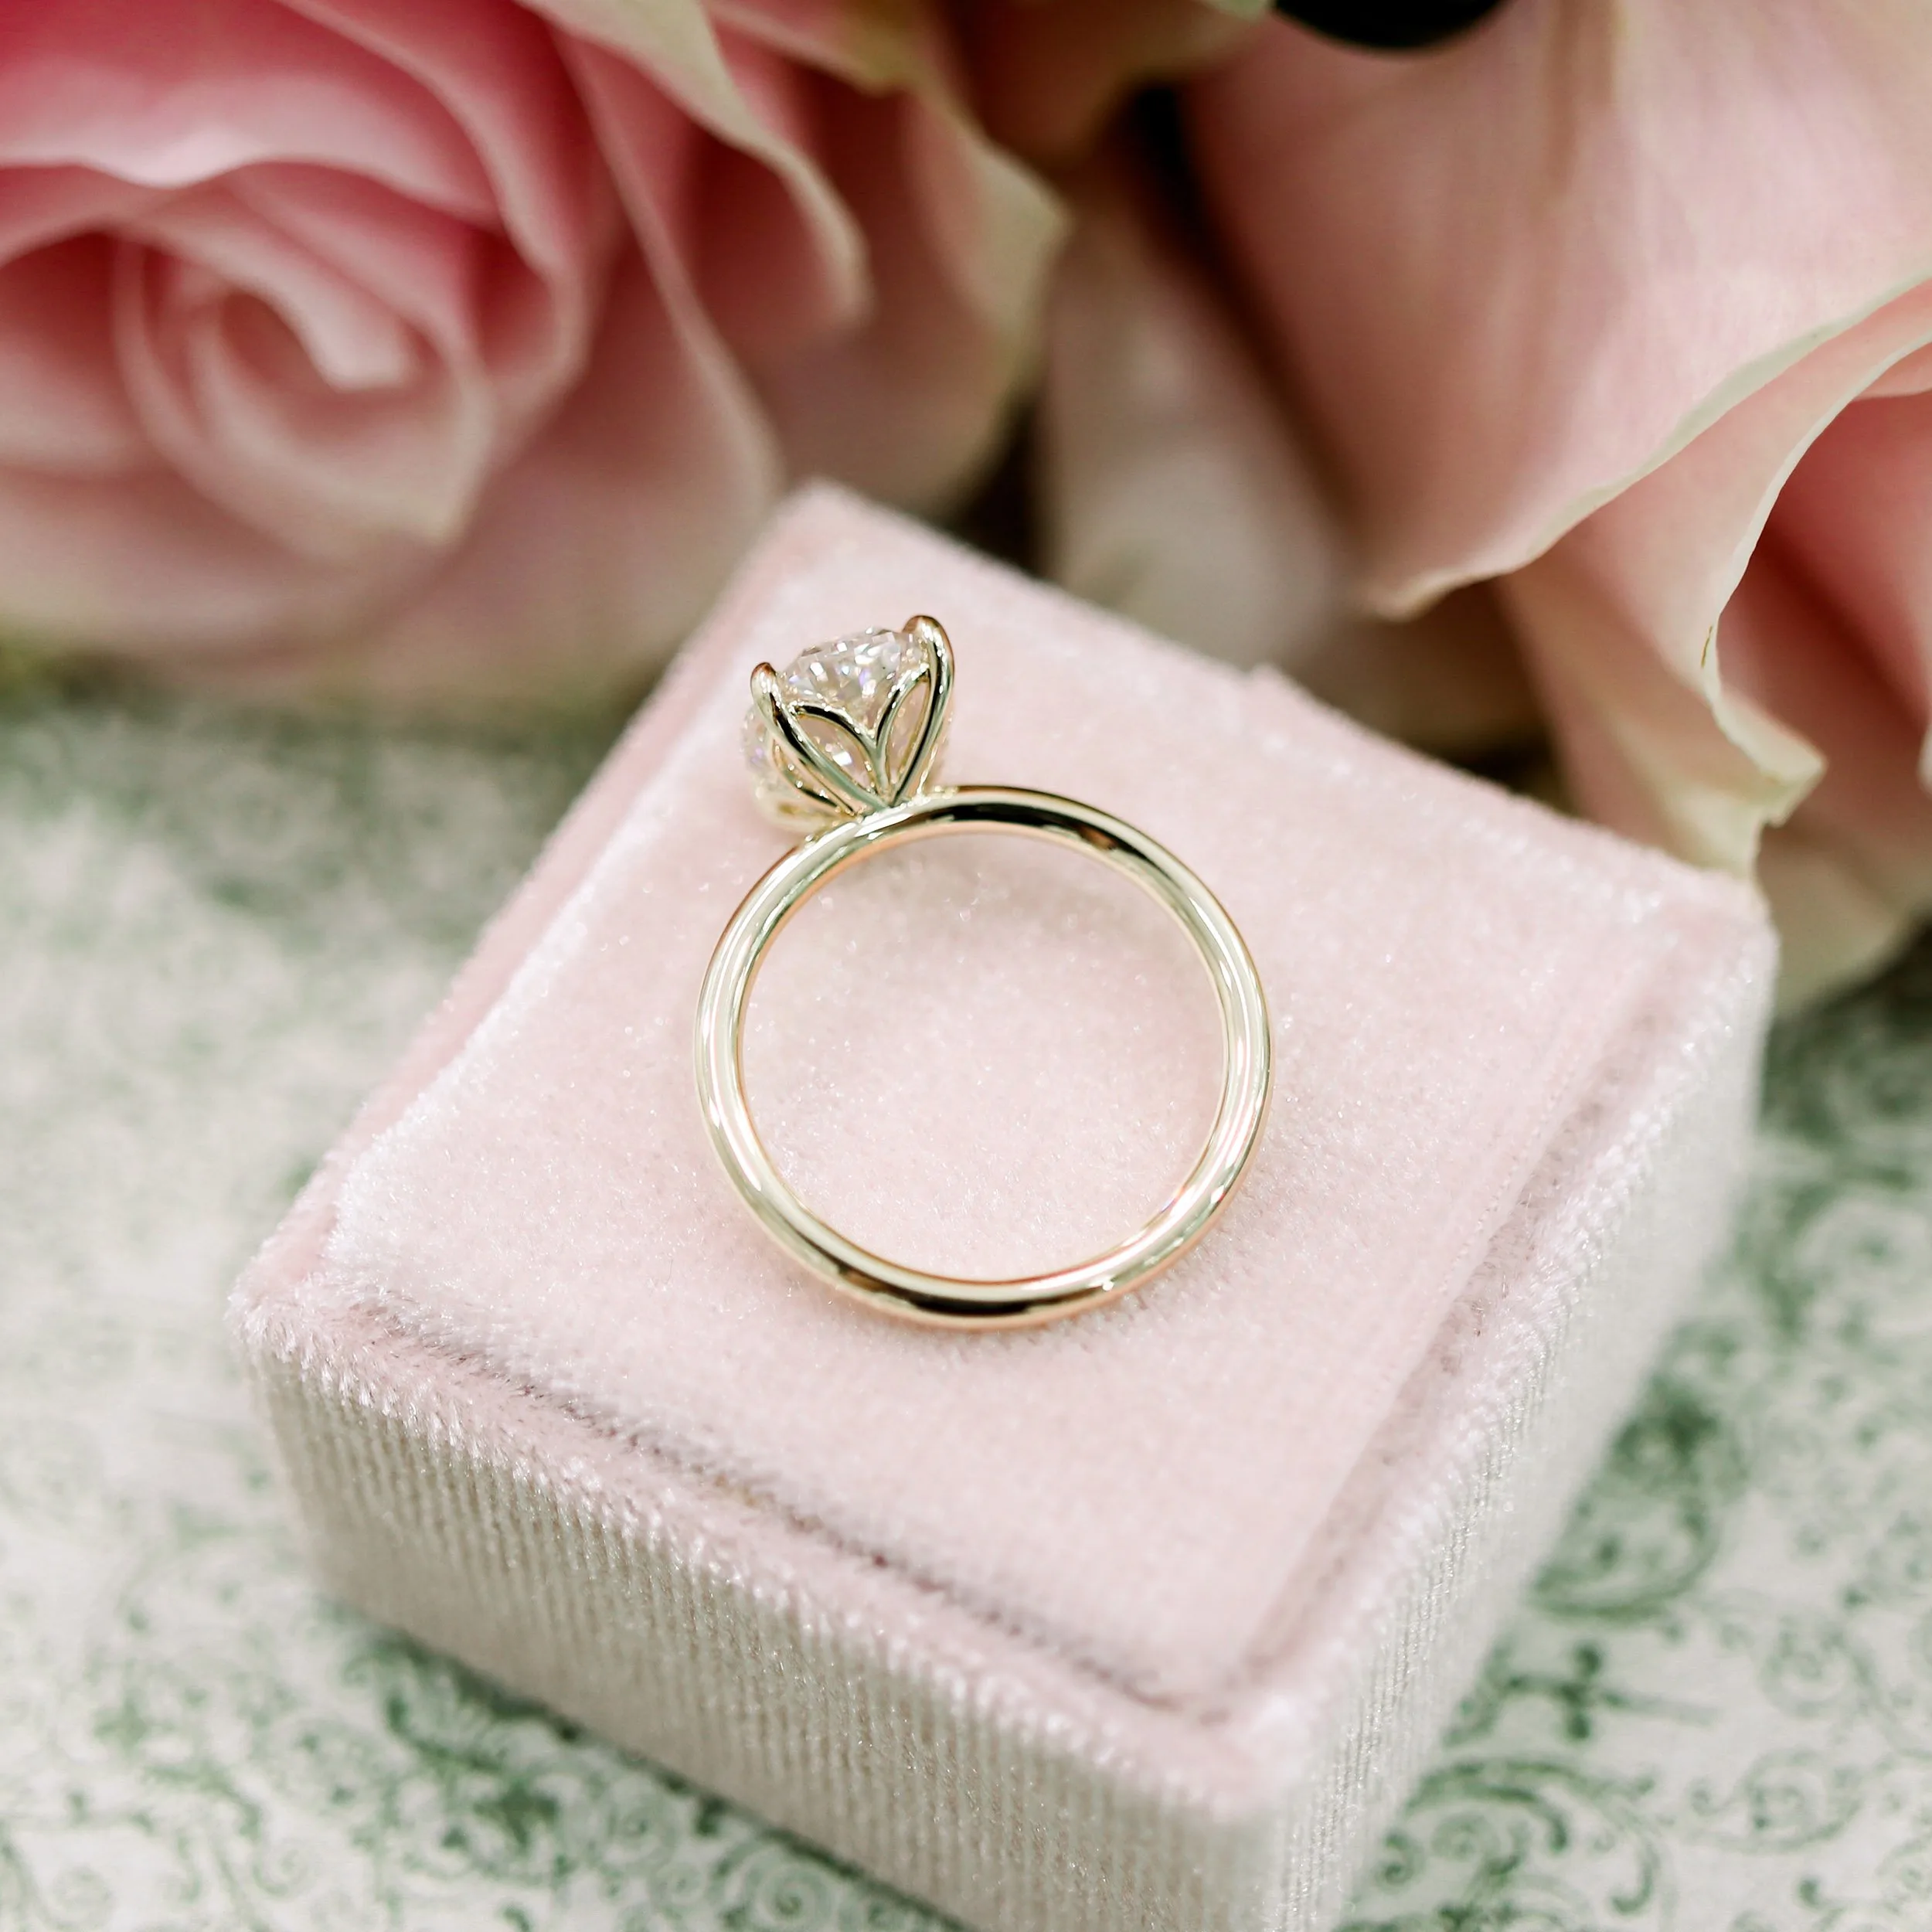 lab-created-yellow-gold-solitaire-engagement-ring_1644816446265-9CH1FHOL98GUD3F4GH7E